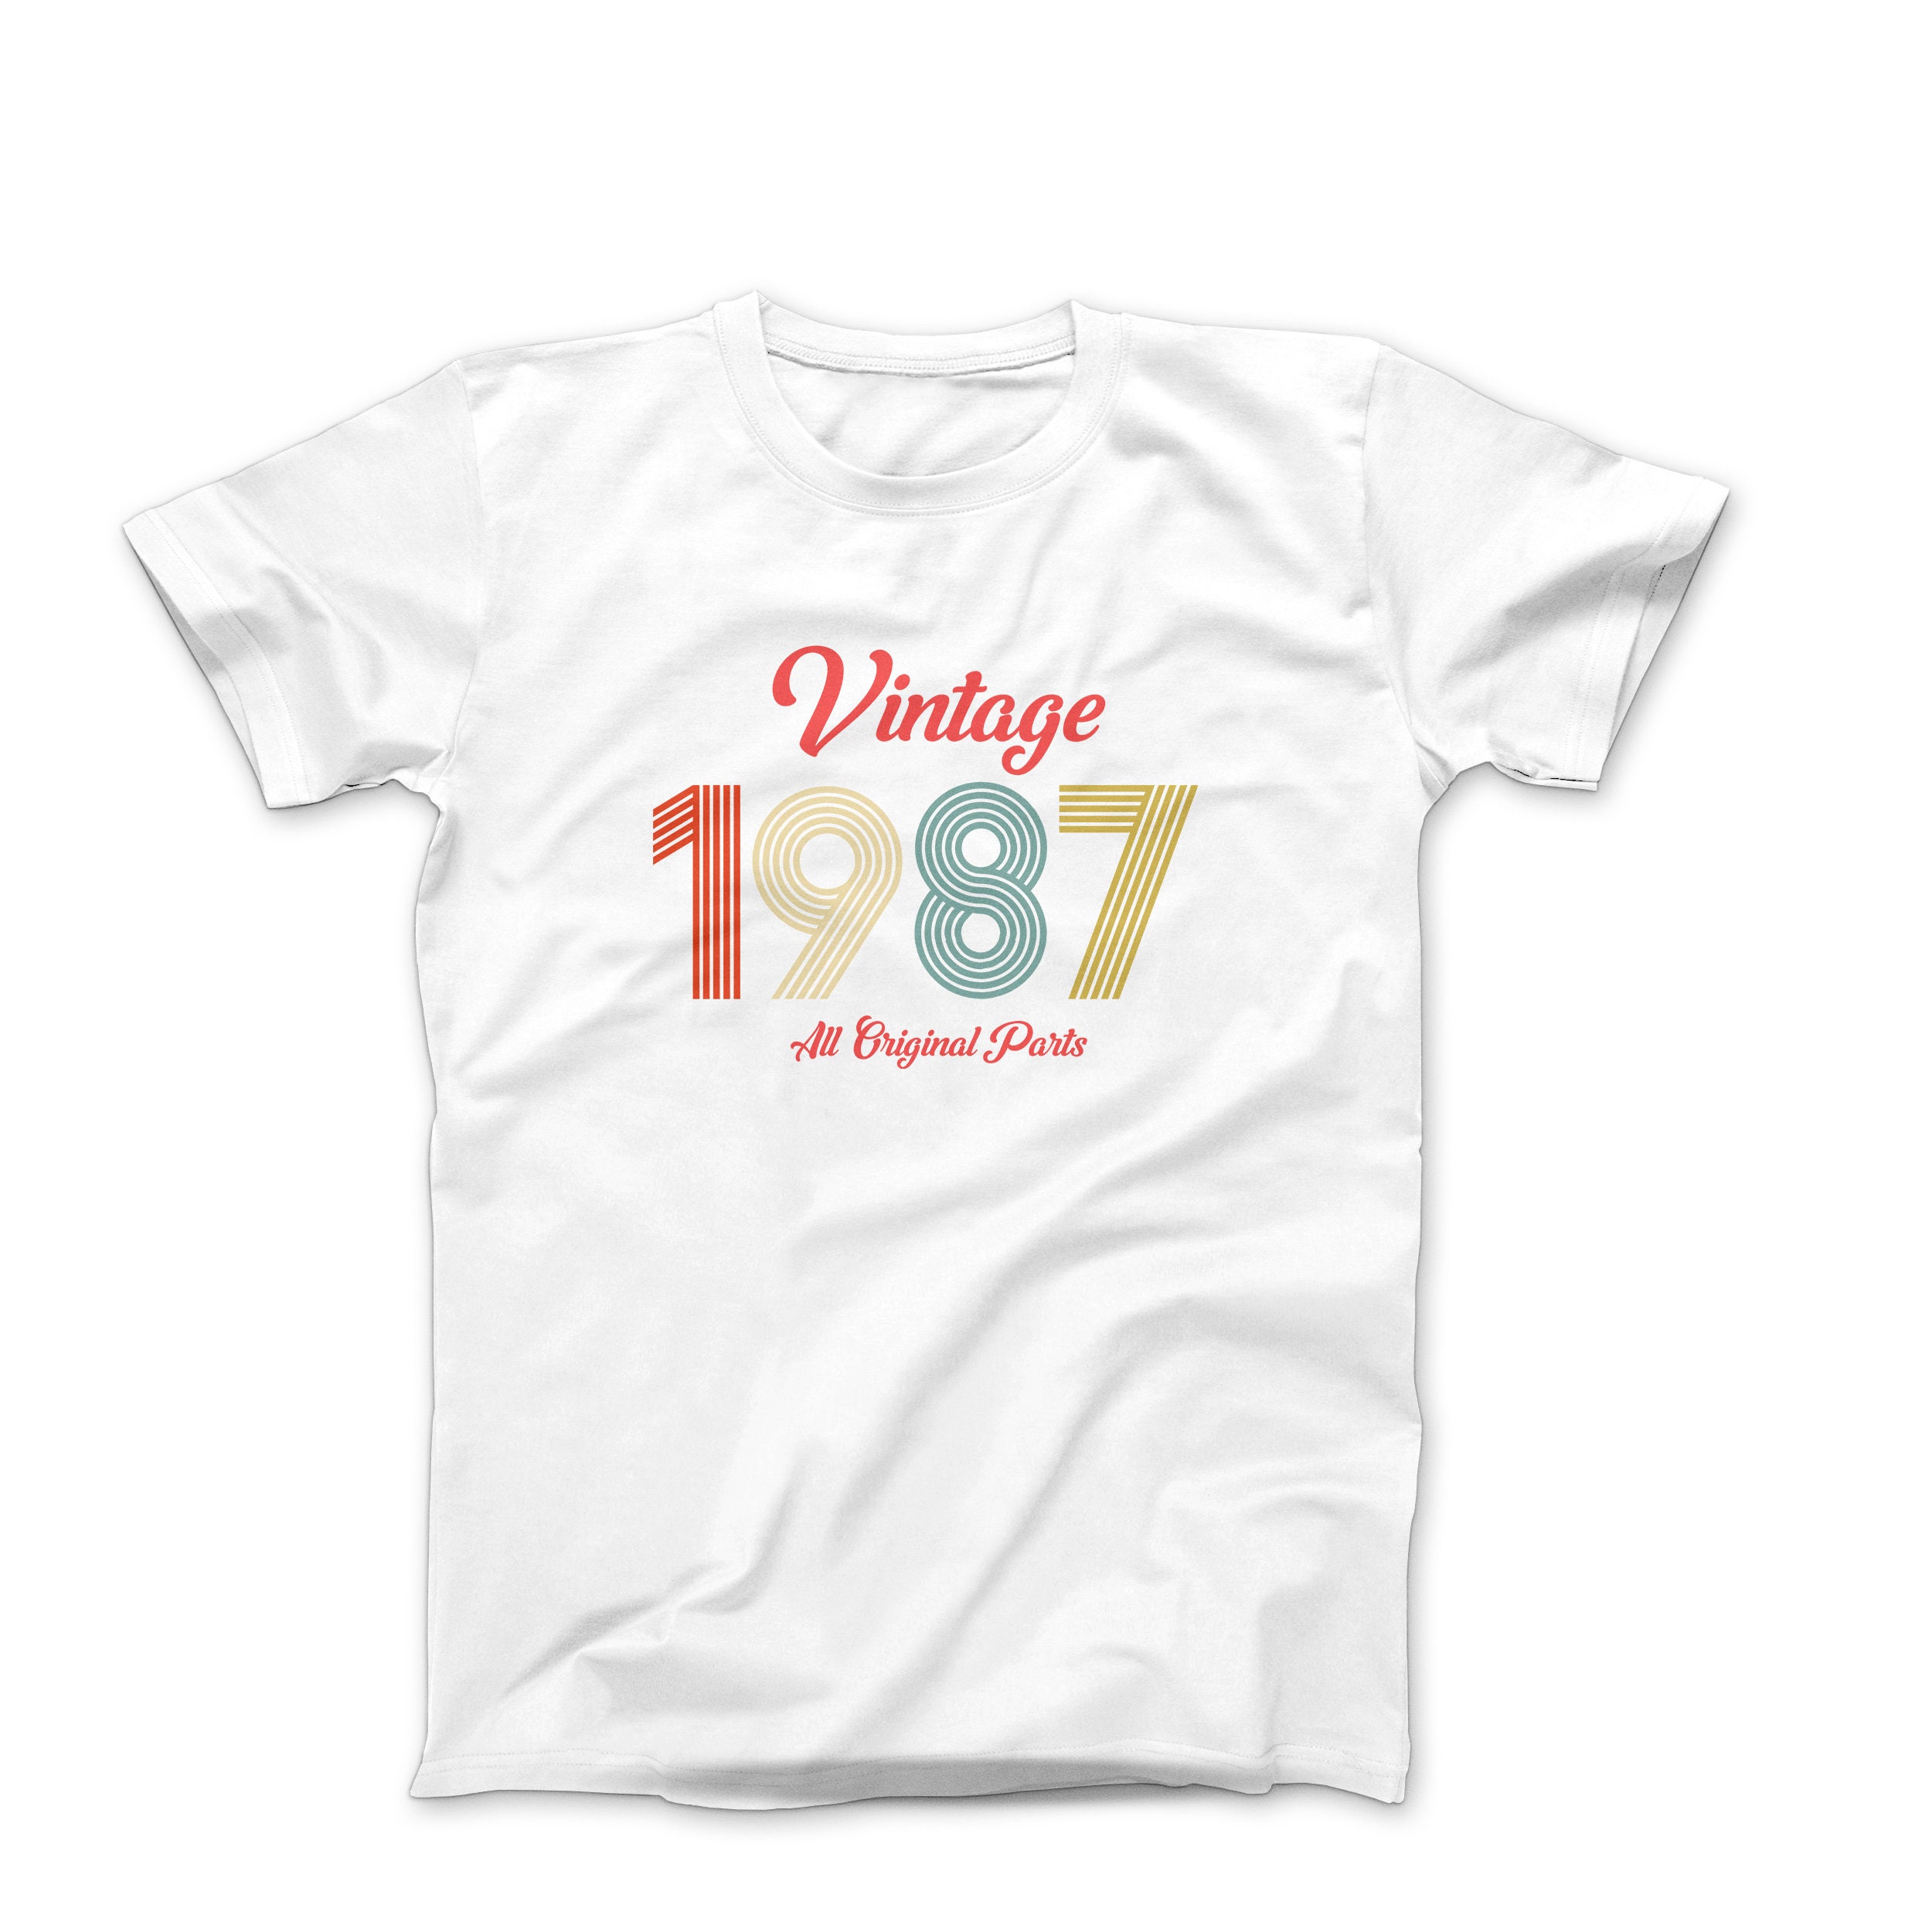 1987 Vintage Short Sleeve T-shirt 1987 T-shirt Made in 1987 - Etsy